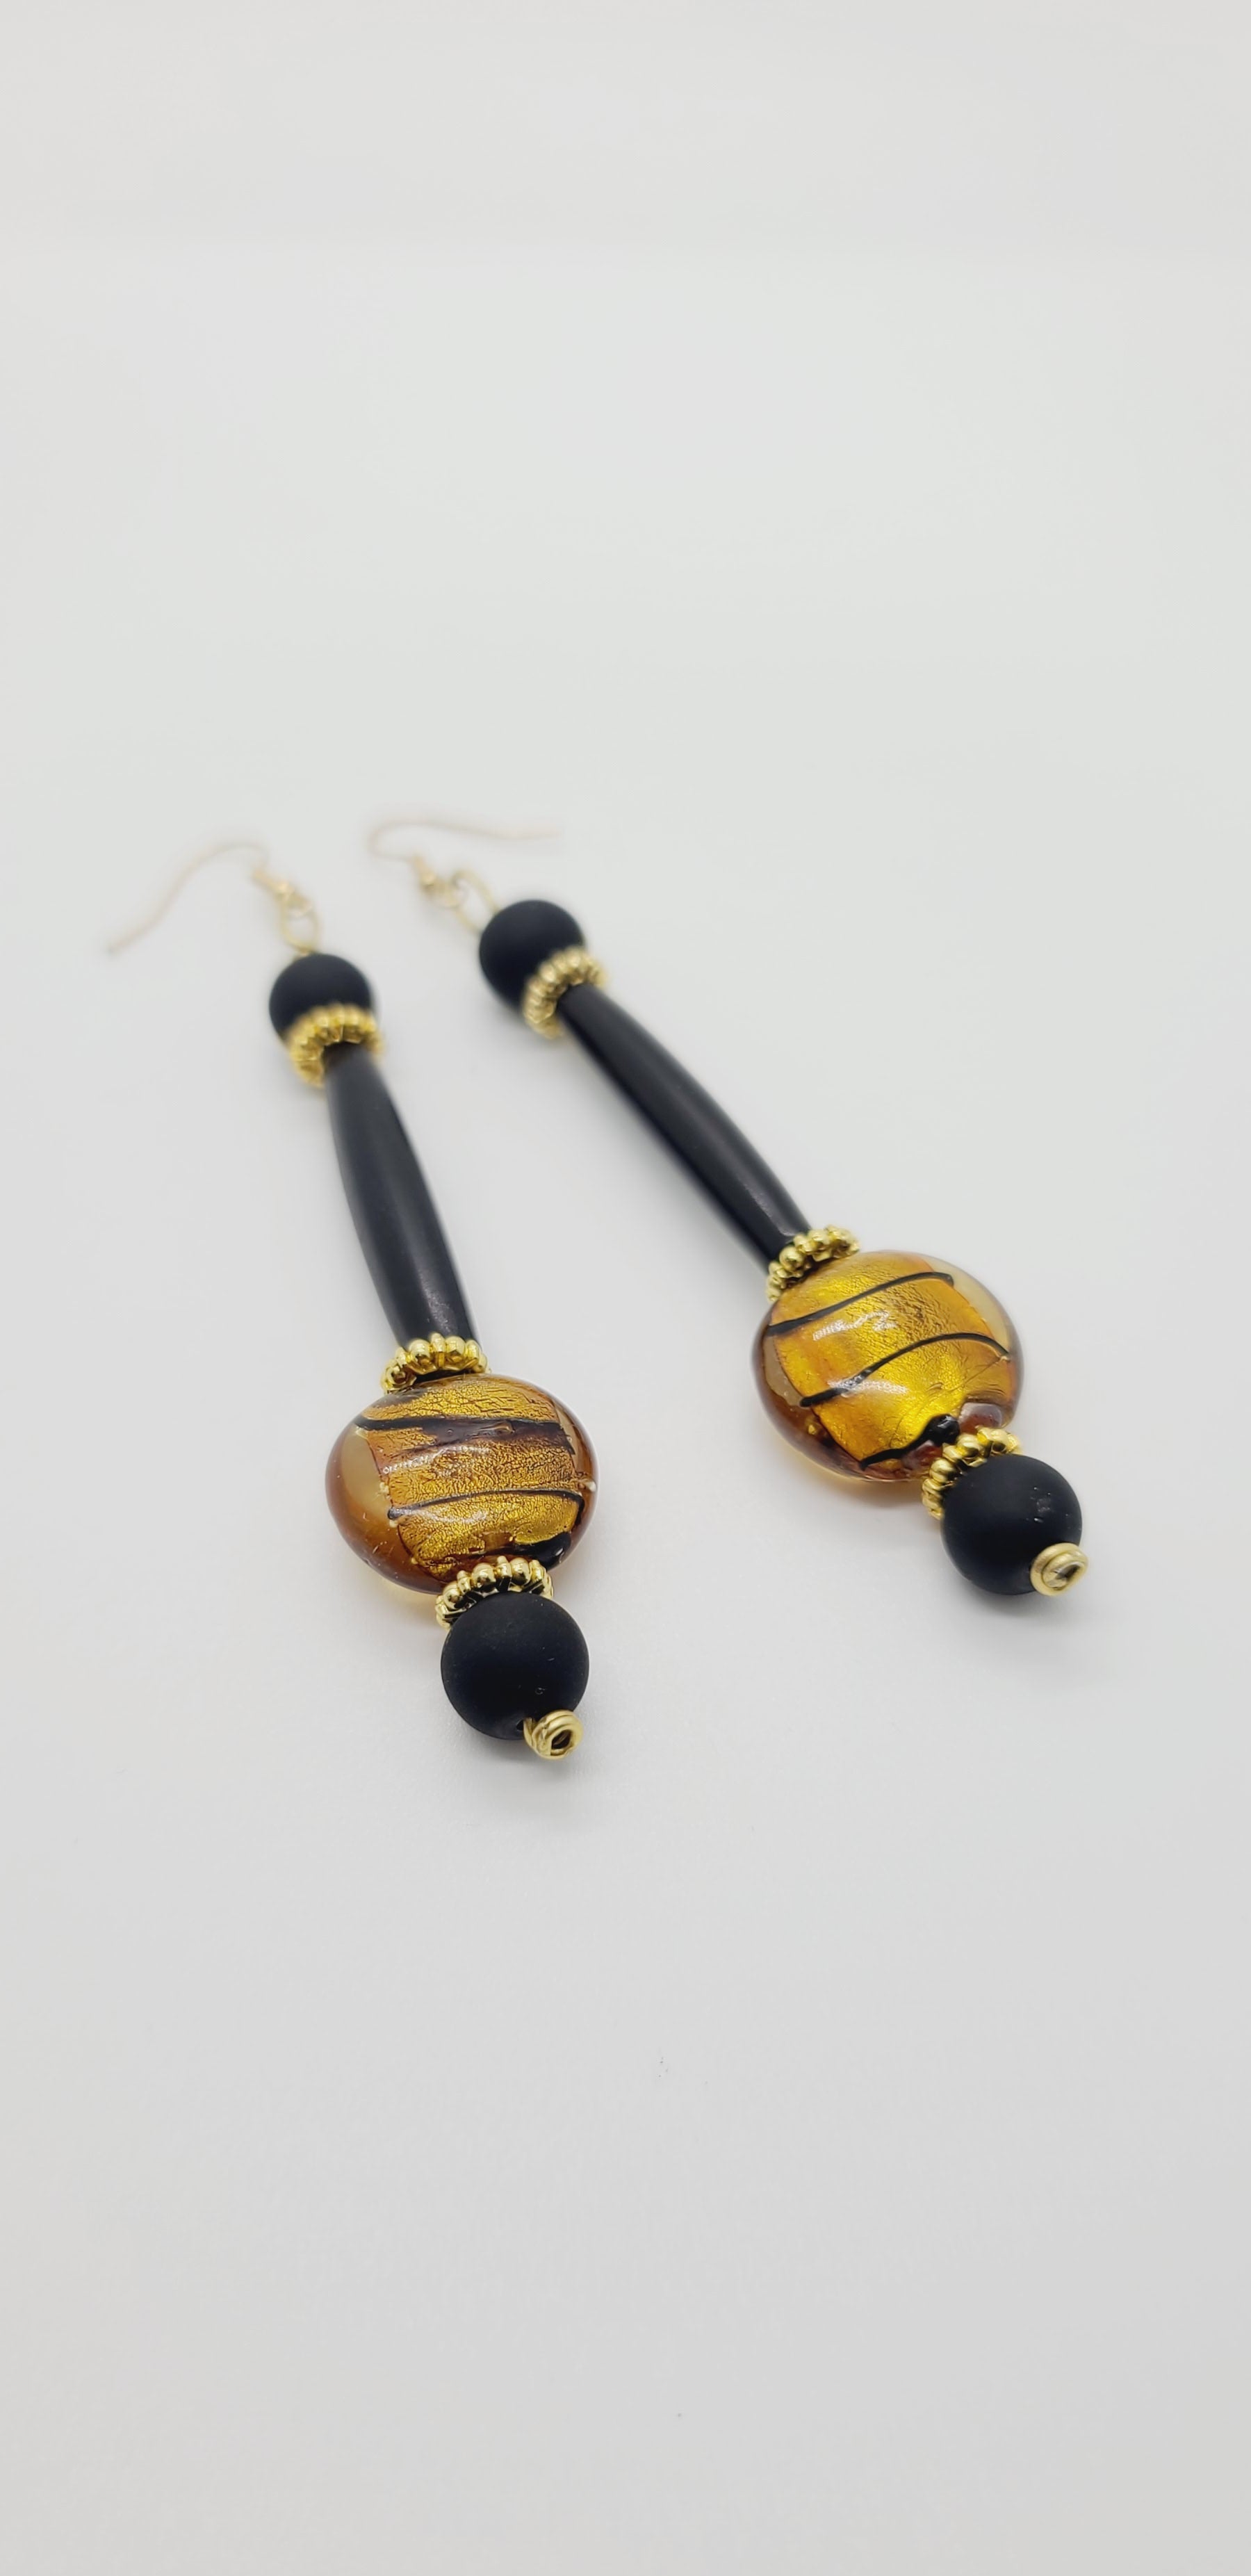 Length: 4.5 inches | Weight: 0.8 ounces  Distinctly You! These earrings are made with gold and black Italian Murano glass stones,10mm matte black glass beads, black hair bone tube, and gold rondelles.